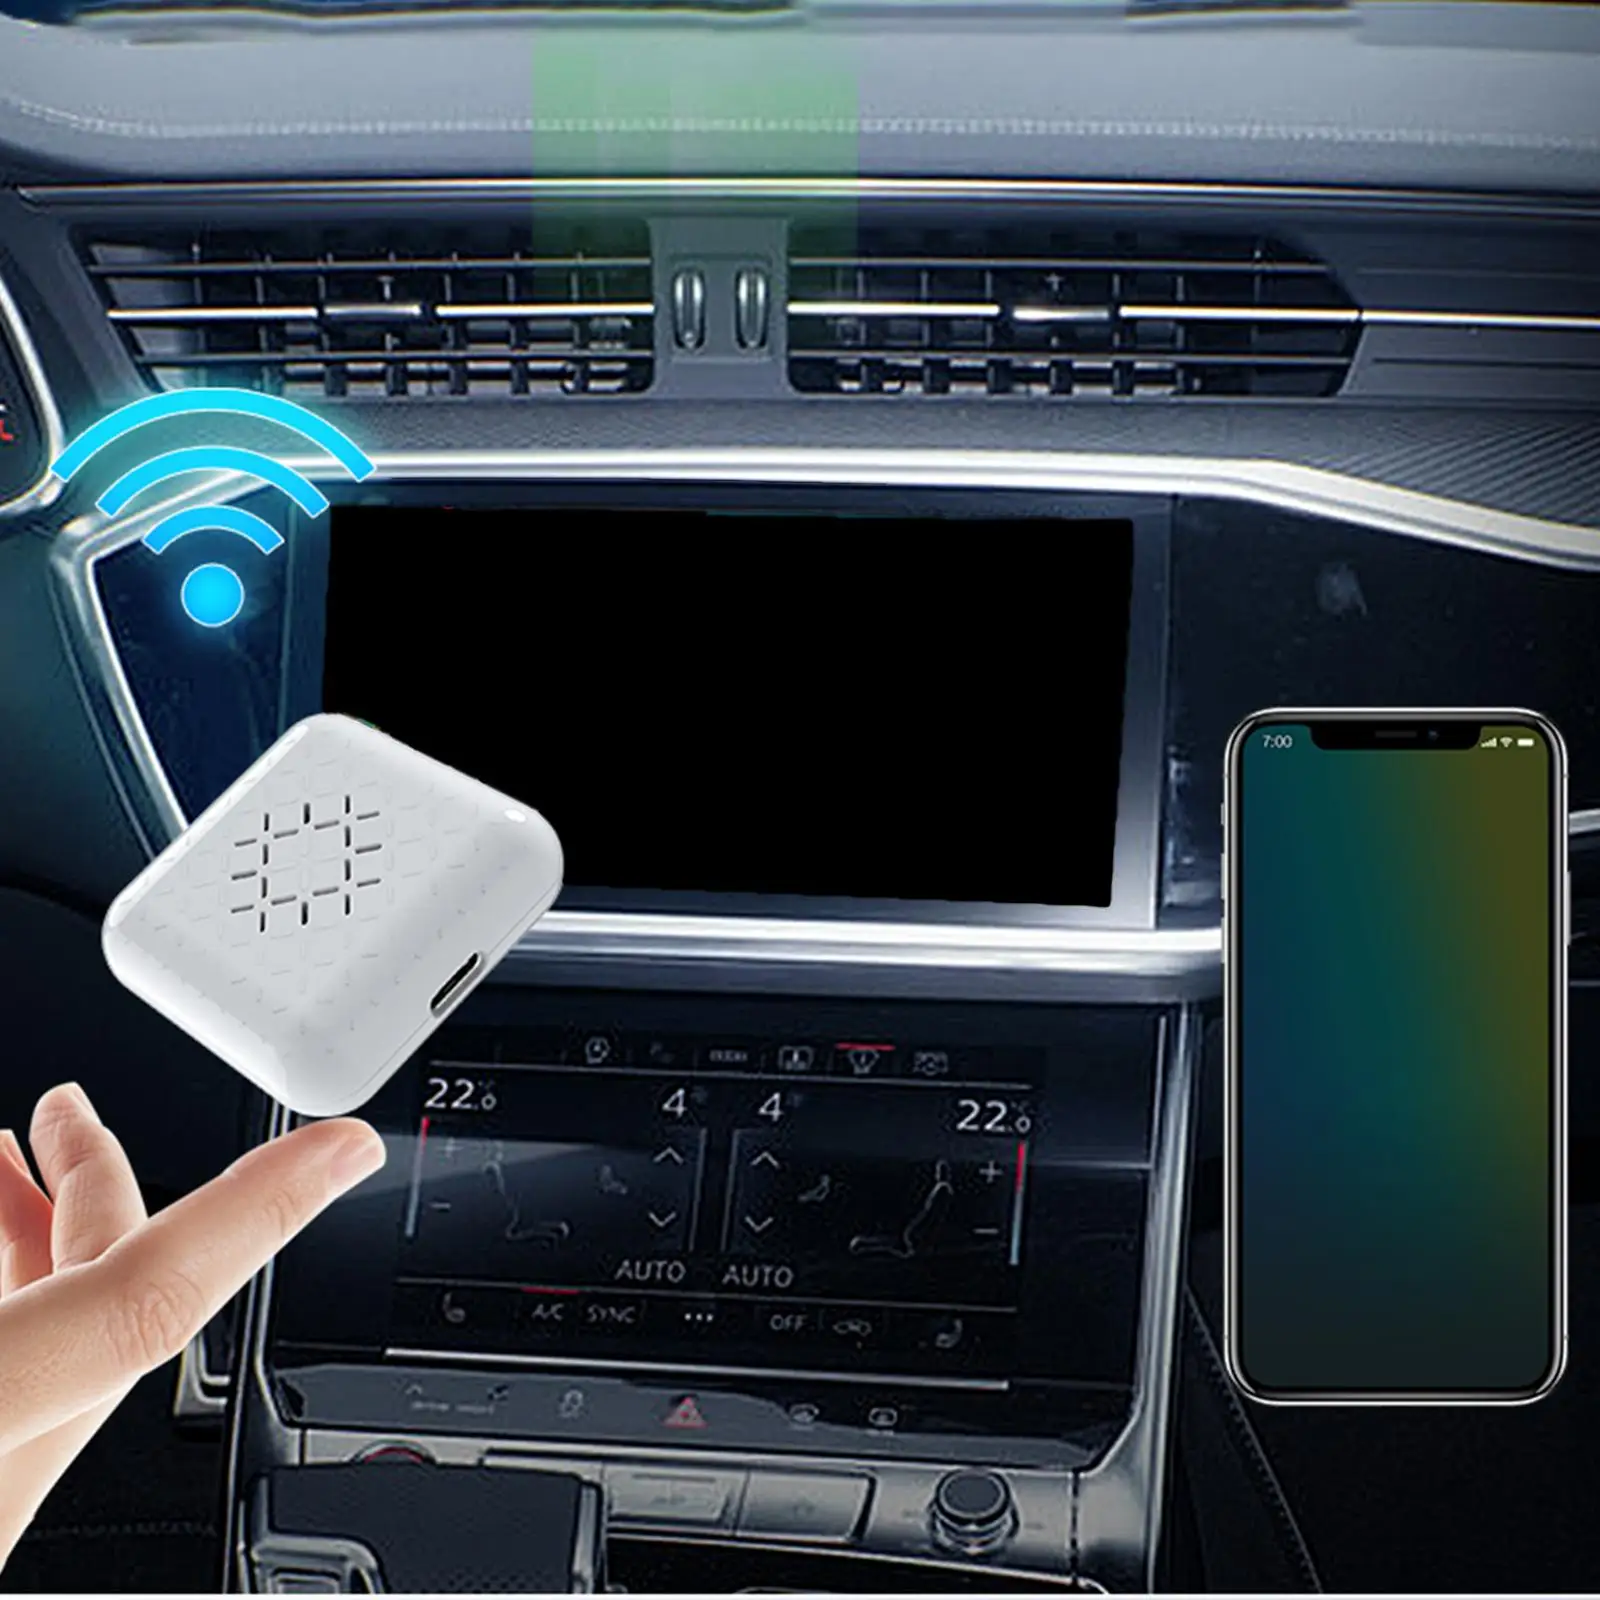 Mini Wireless Car Play Adapter, Online Update Easy Setup 5G WiFi Wireless Interconnection Box for Cars with Car Play Function